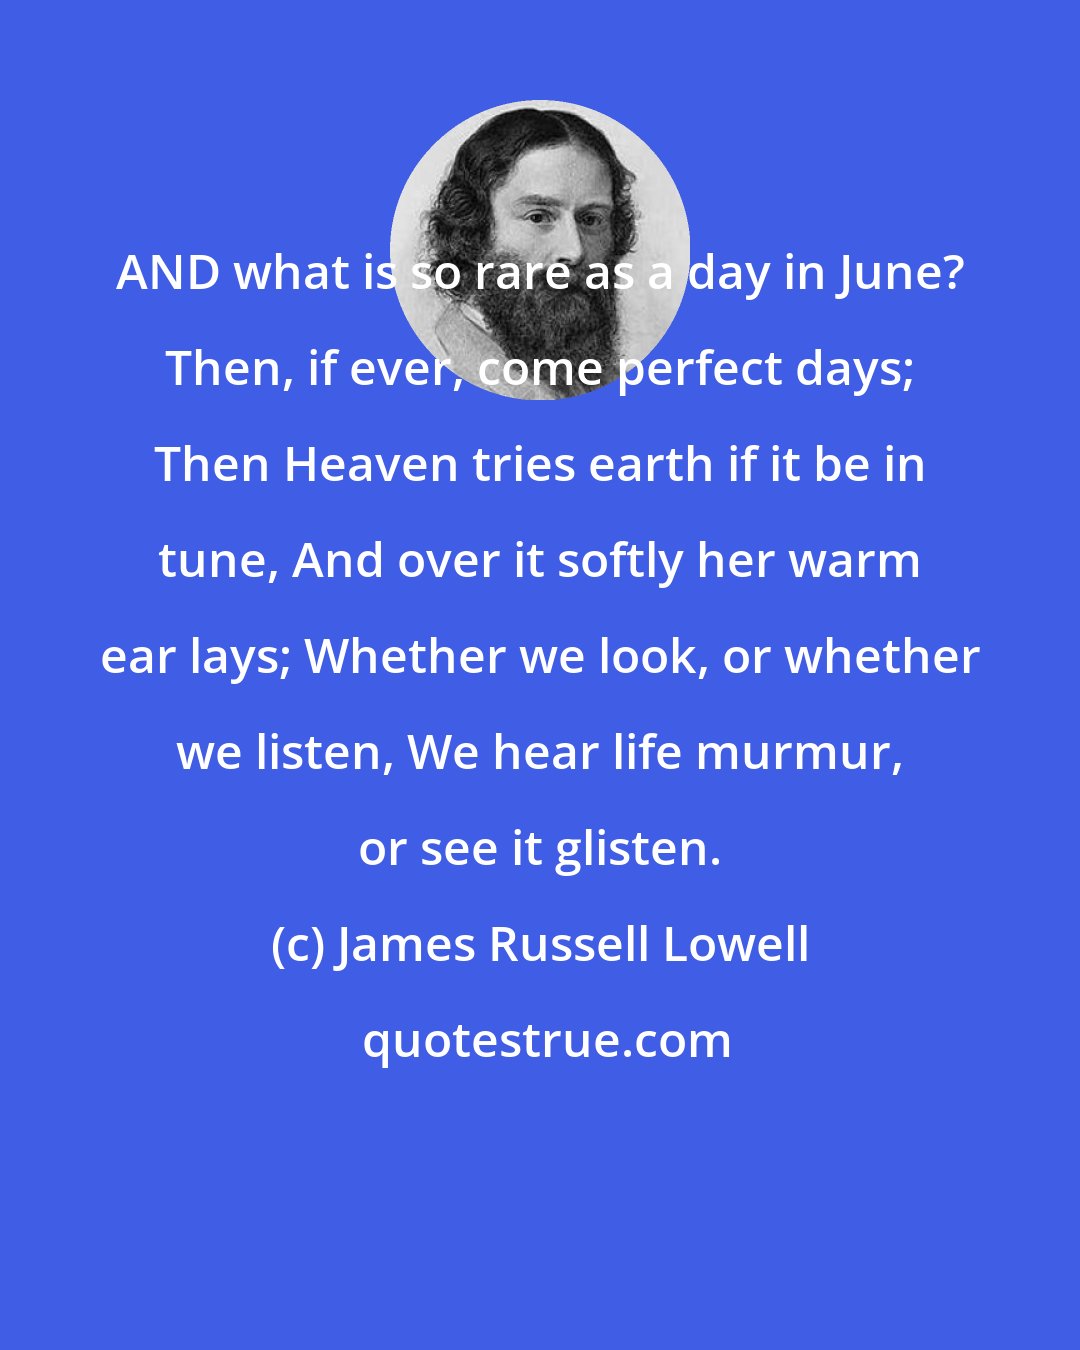 James Russell Lowell: AND what is so rare as a day in June? Then, if ever, come perfect days; Then Heaven tries earth if it be in tune, And over it softly her warm ear lays; Whether we look, or whether we listen, We hear life murmur, or see it glisten.